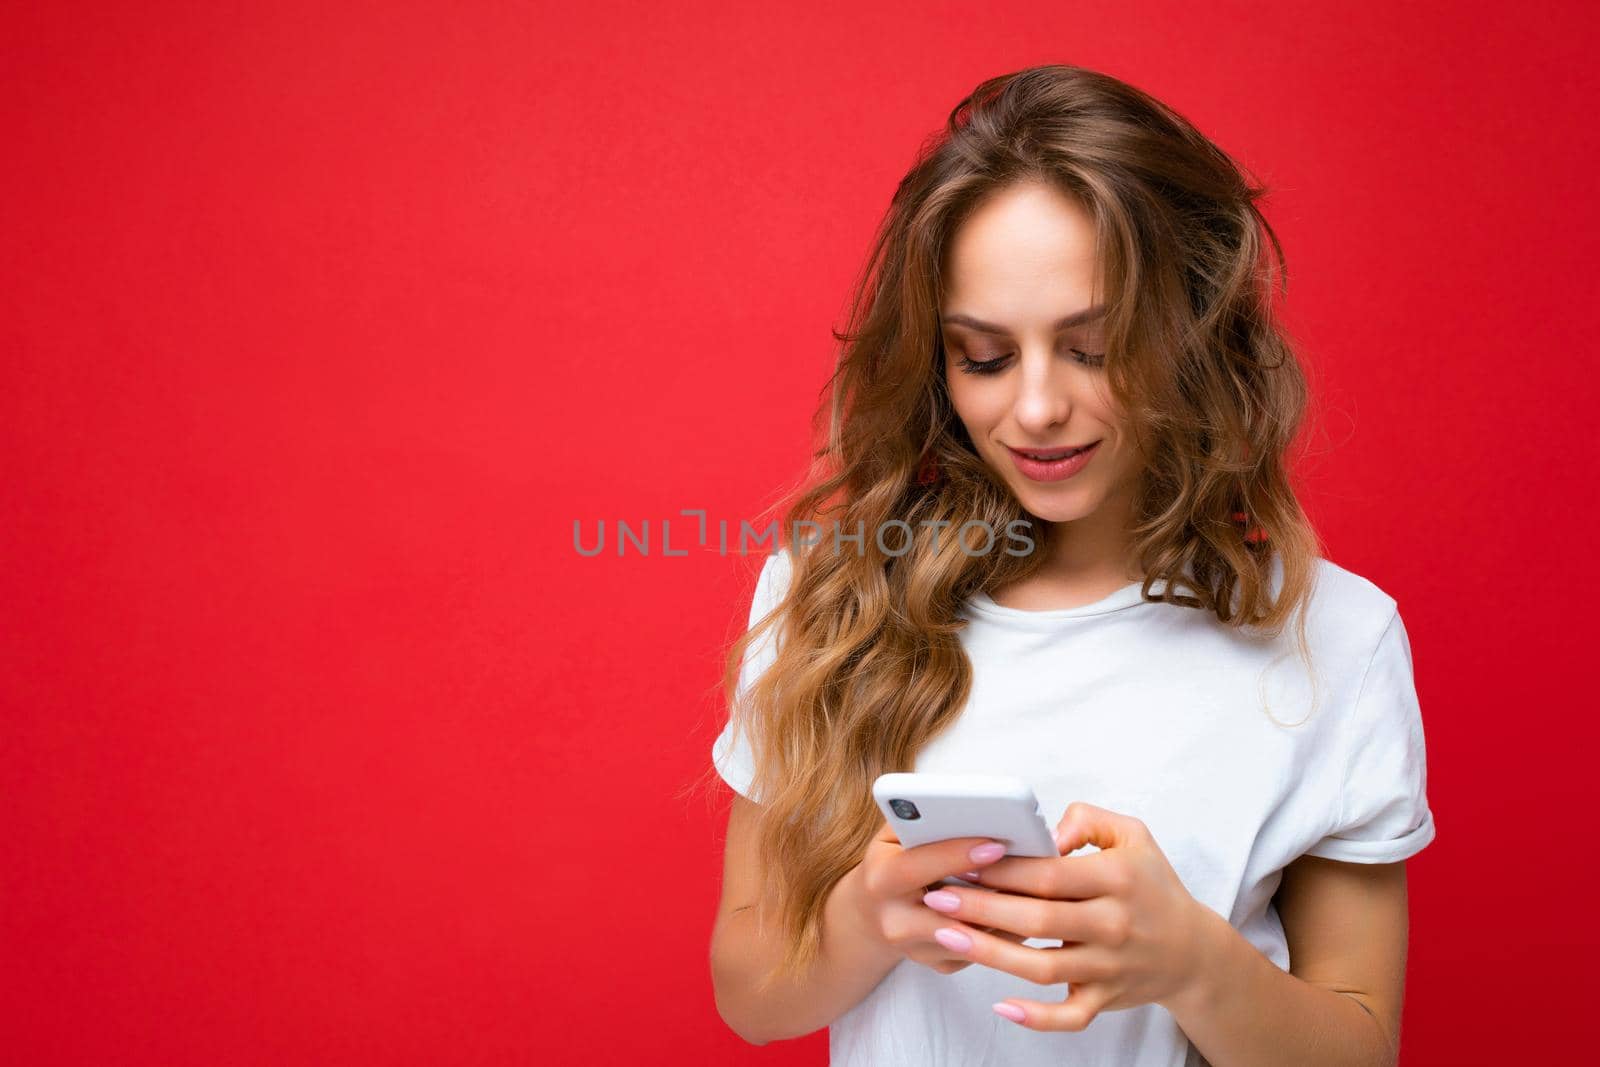 Beautiful young woman wearing casual clothes standing isolated over background surfing on the internet via phone looking at mobile screen.